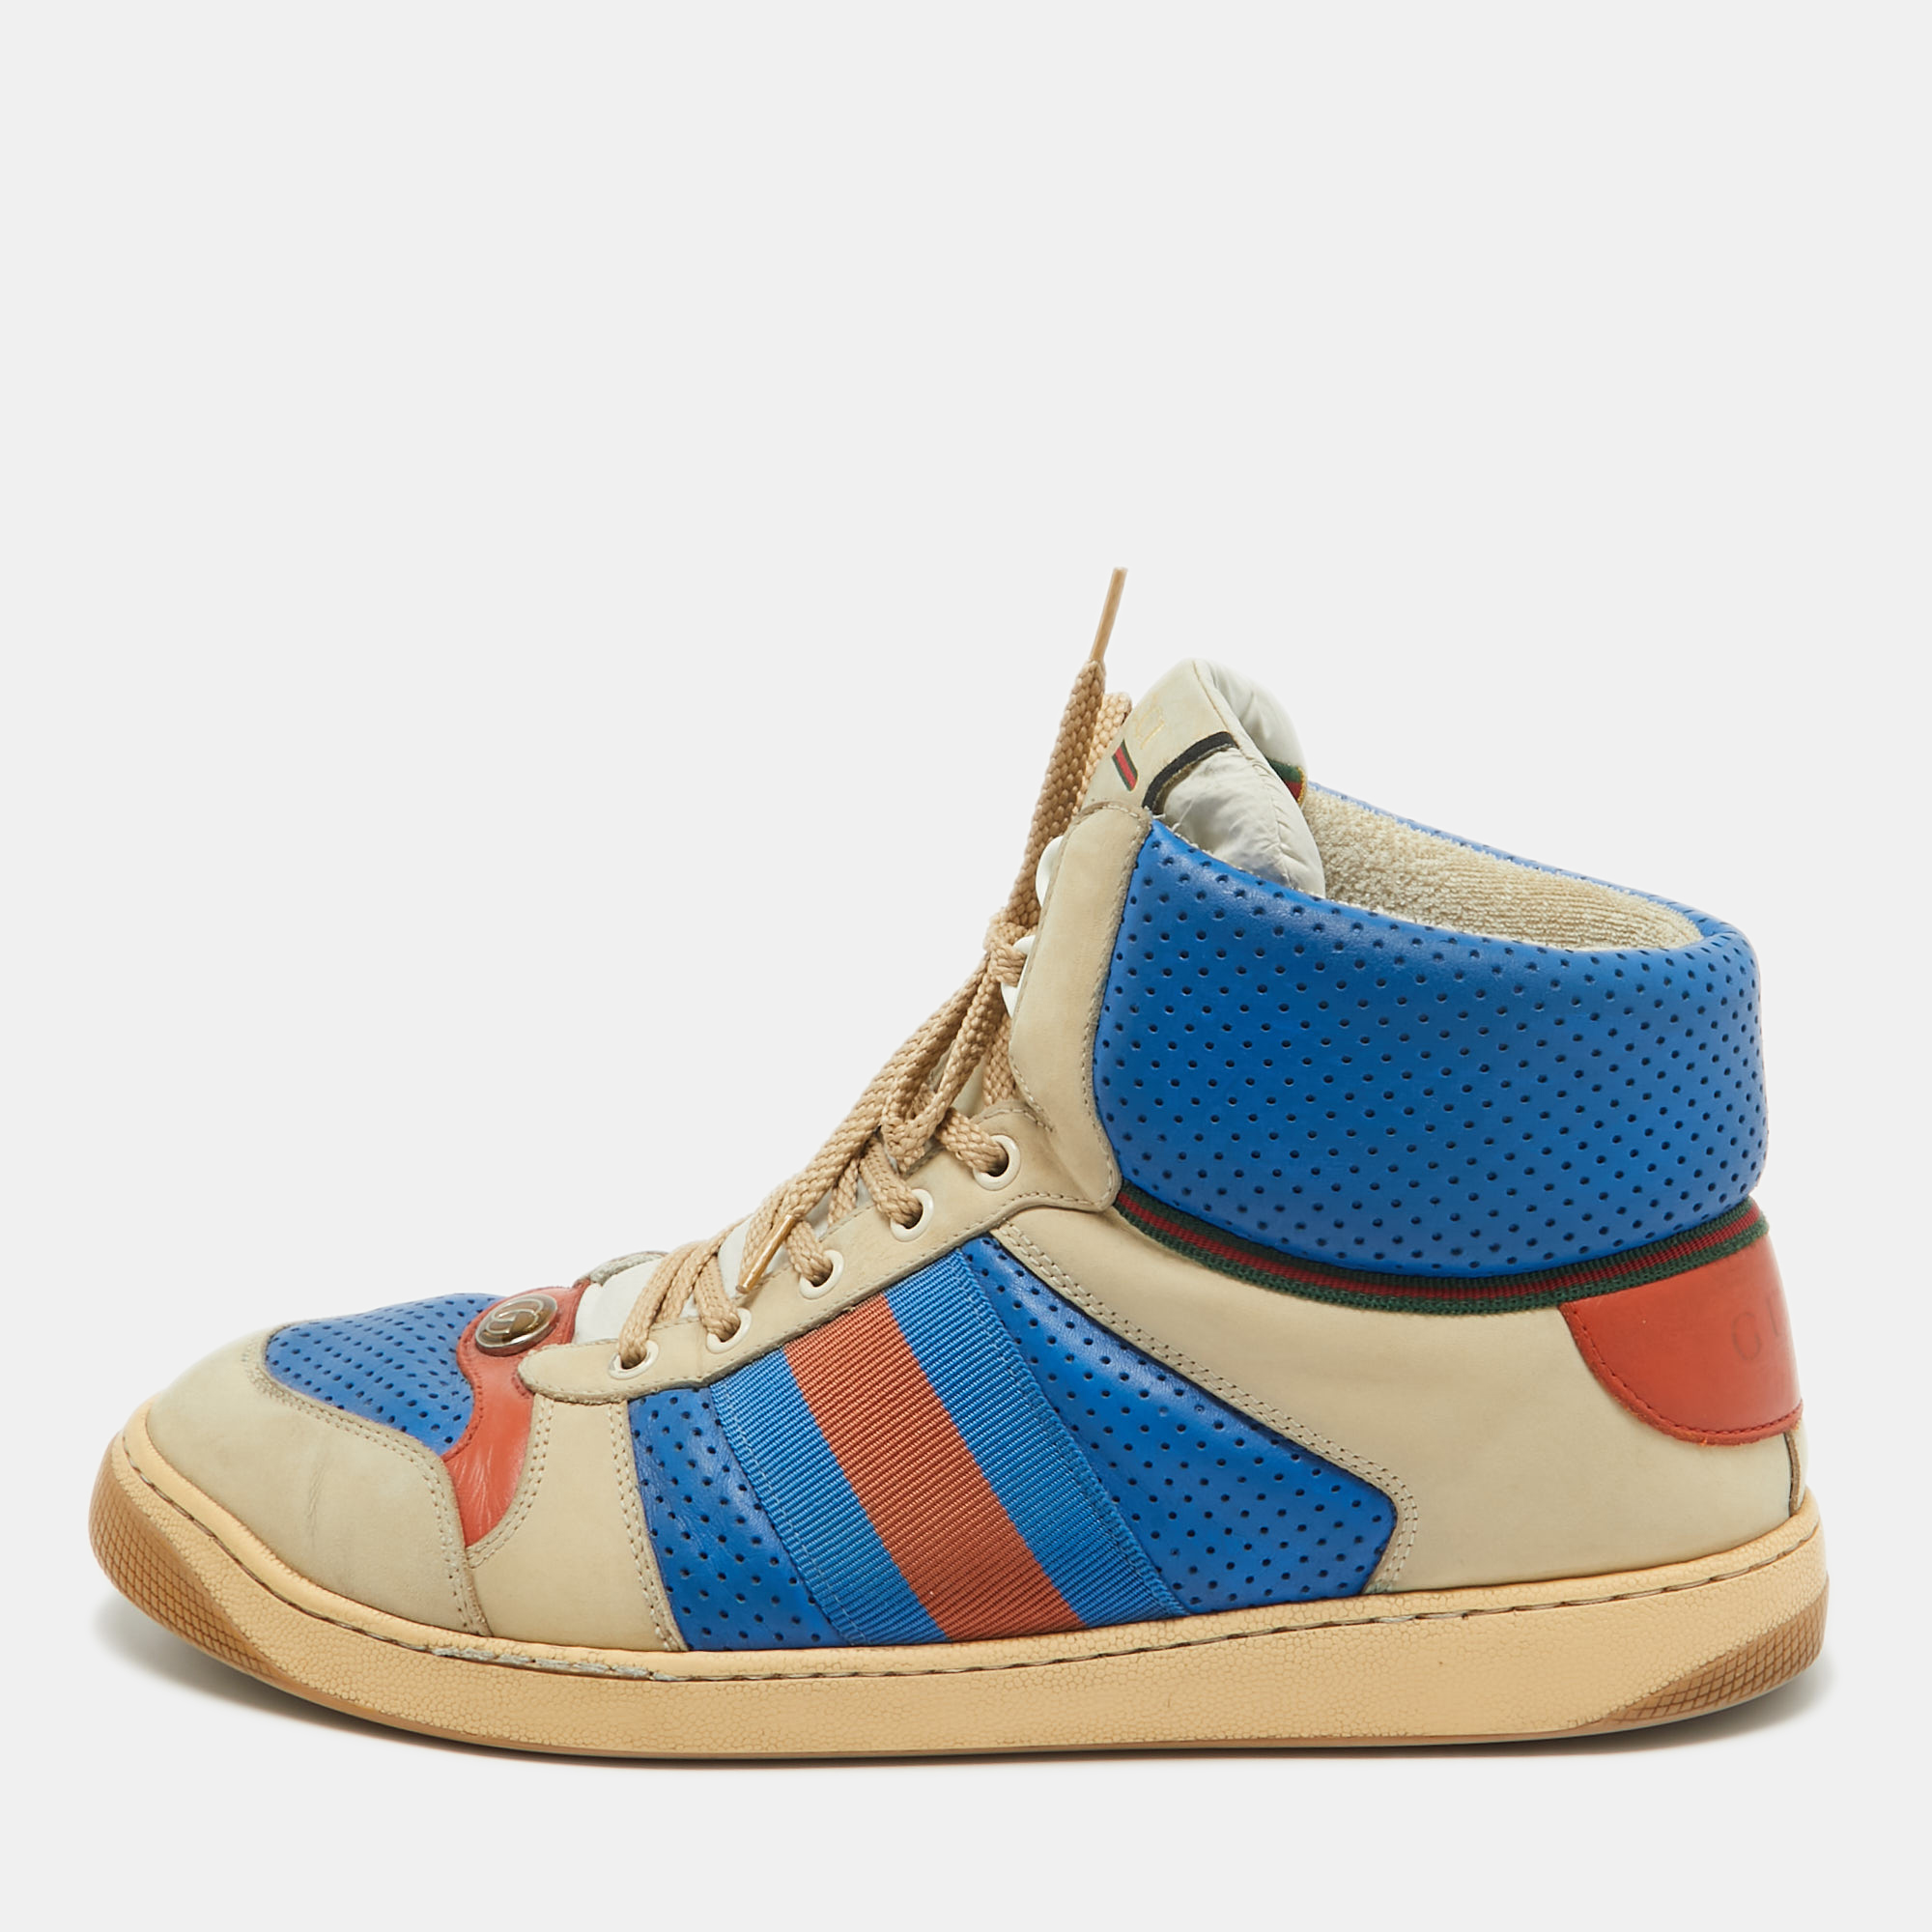 Gucci multicolor perforated leather screener gg high top sneakers size 44.5